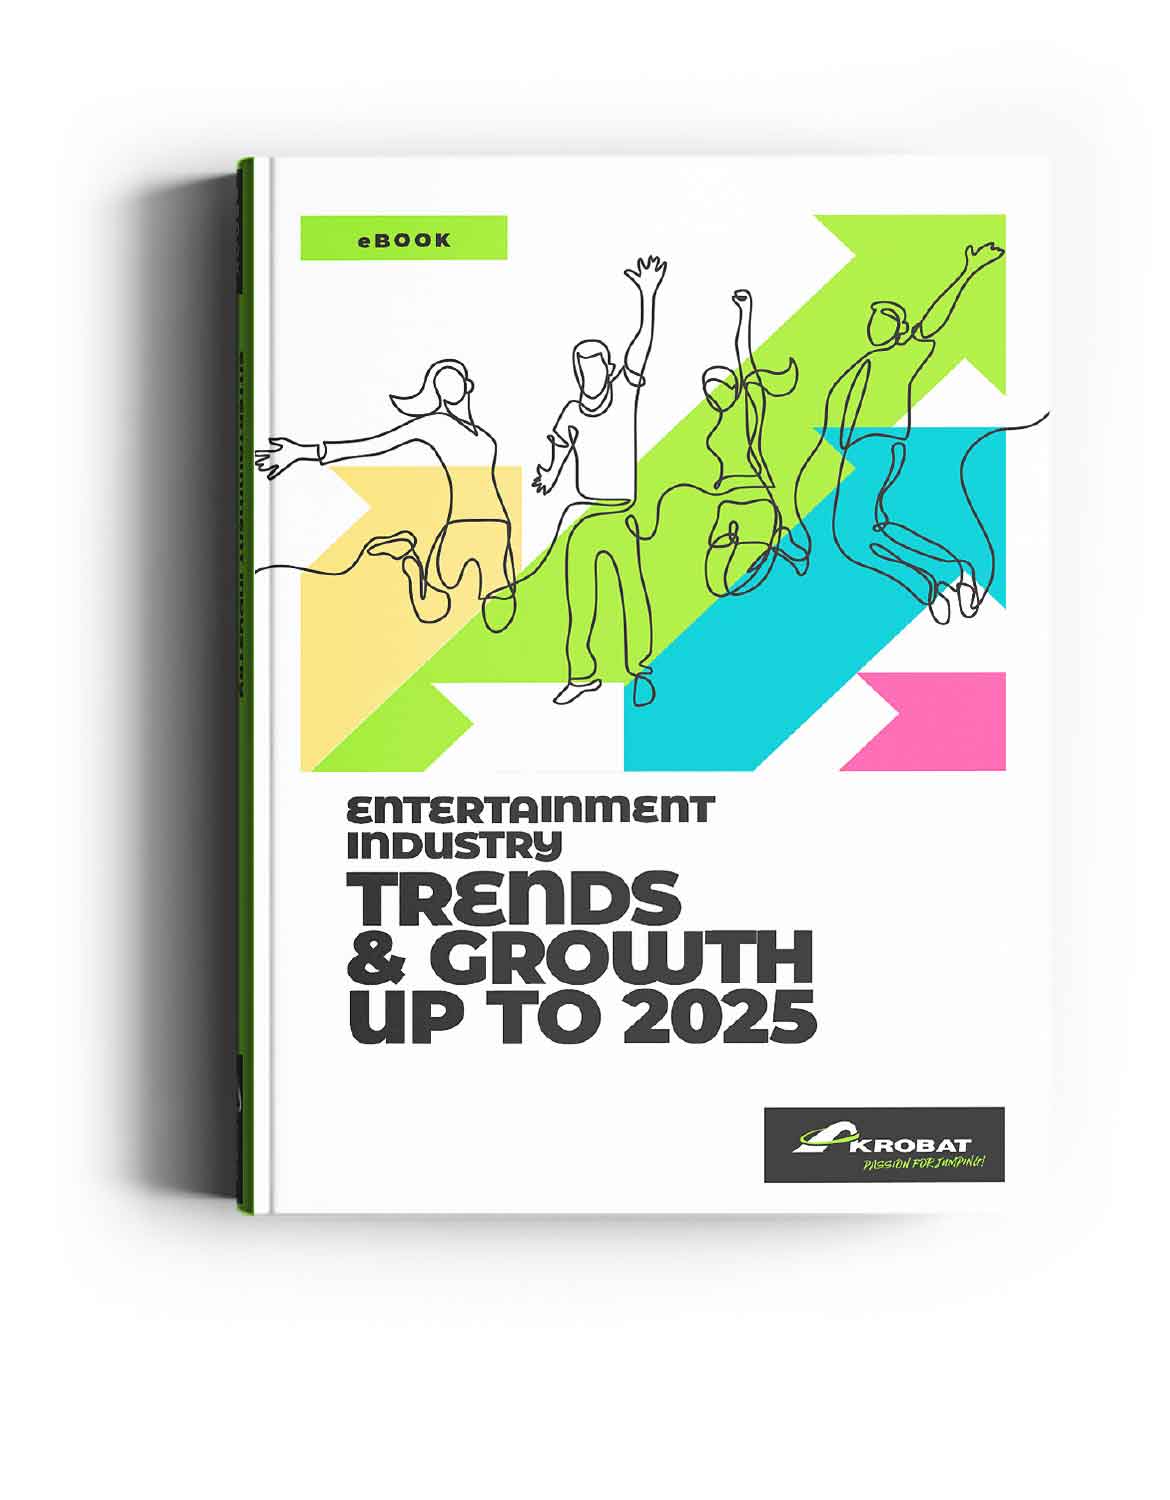 Entertainment industry trends and growth up to 2025